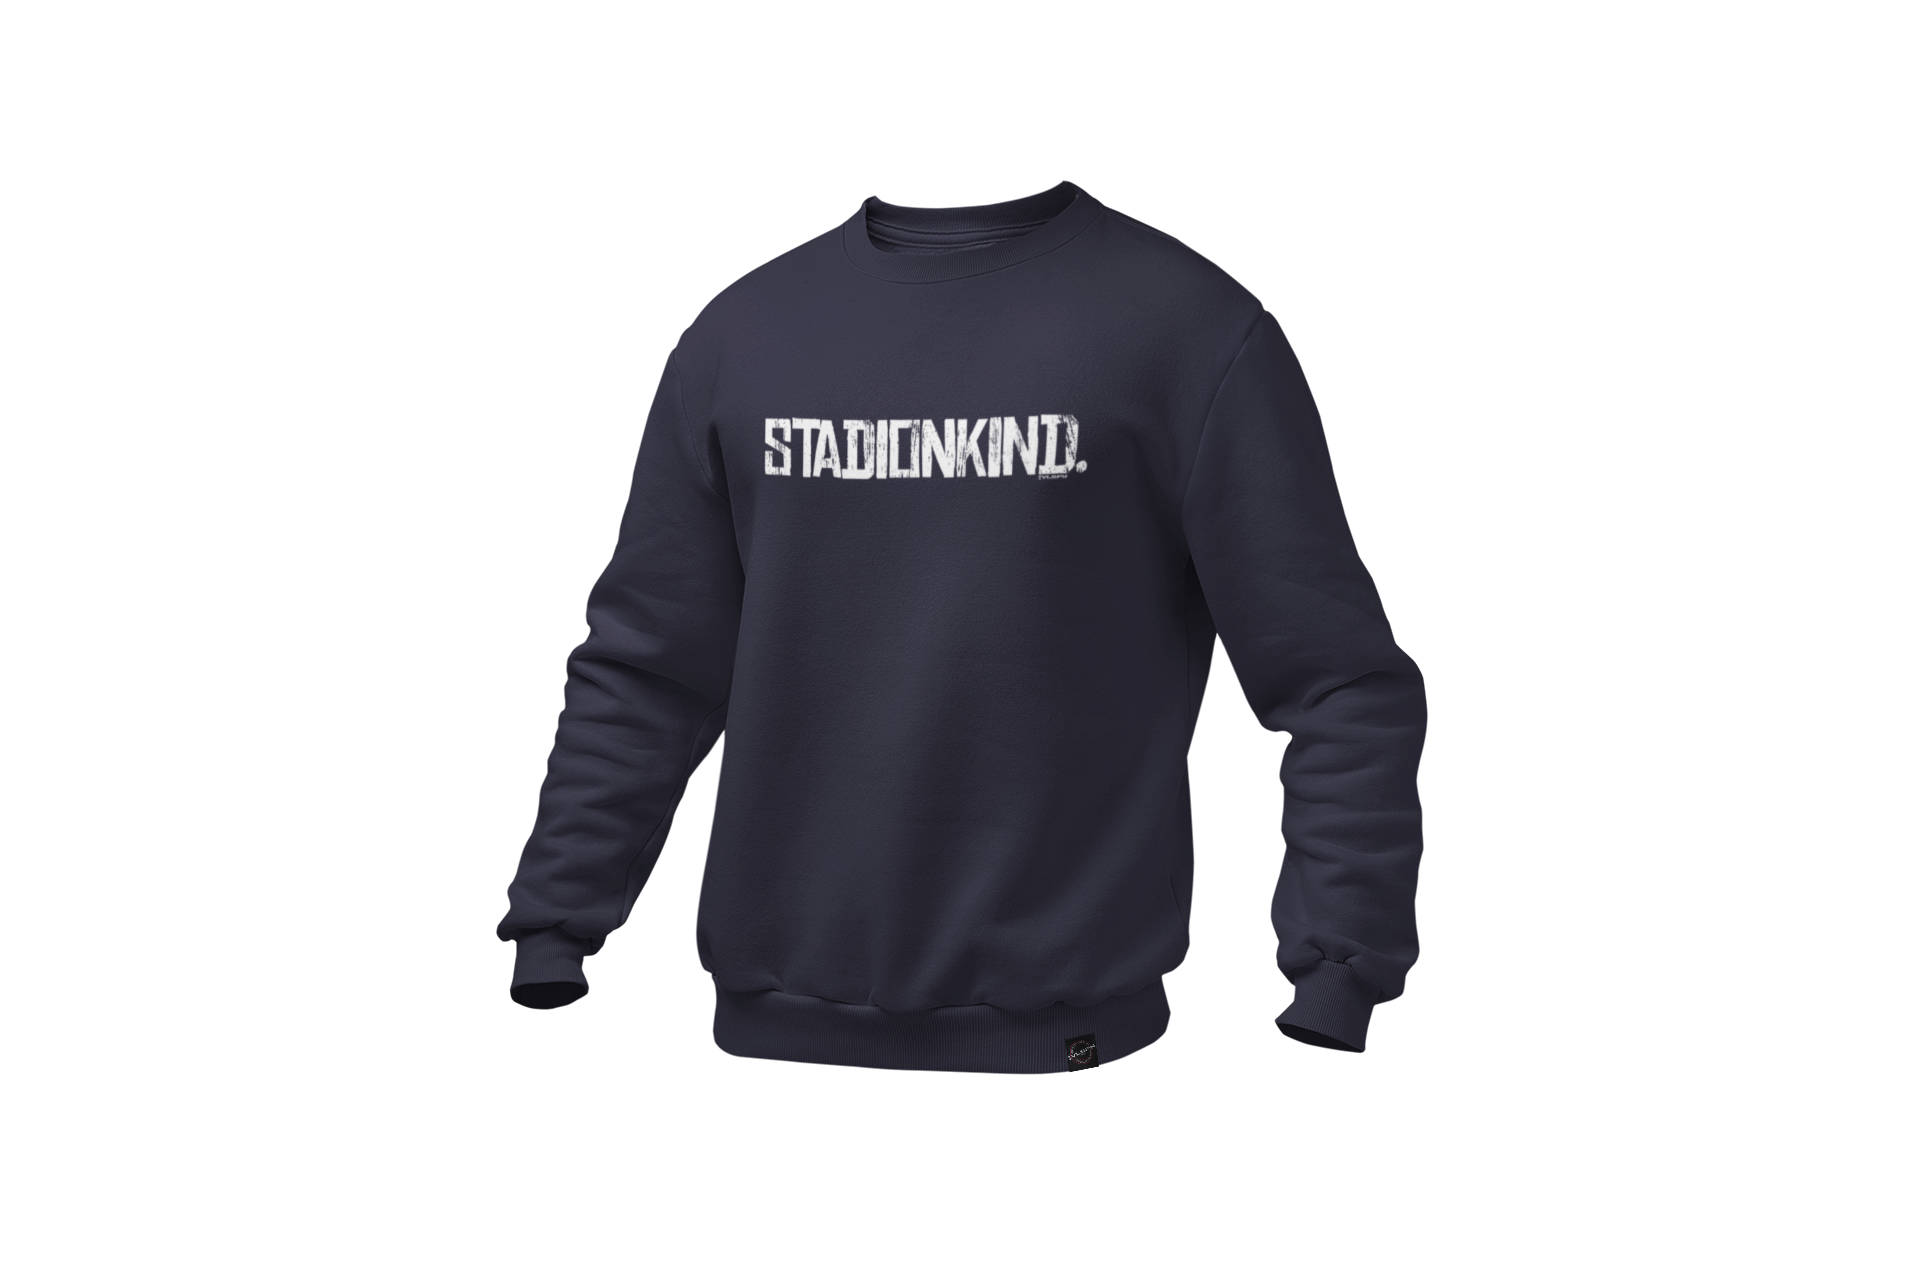 mockup-of-a-ghosted-crewneck-sweatshirt-over-a-solid-background-26960 (80).png